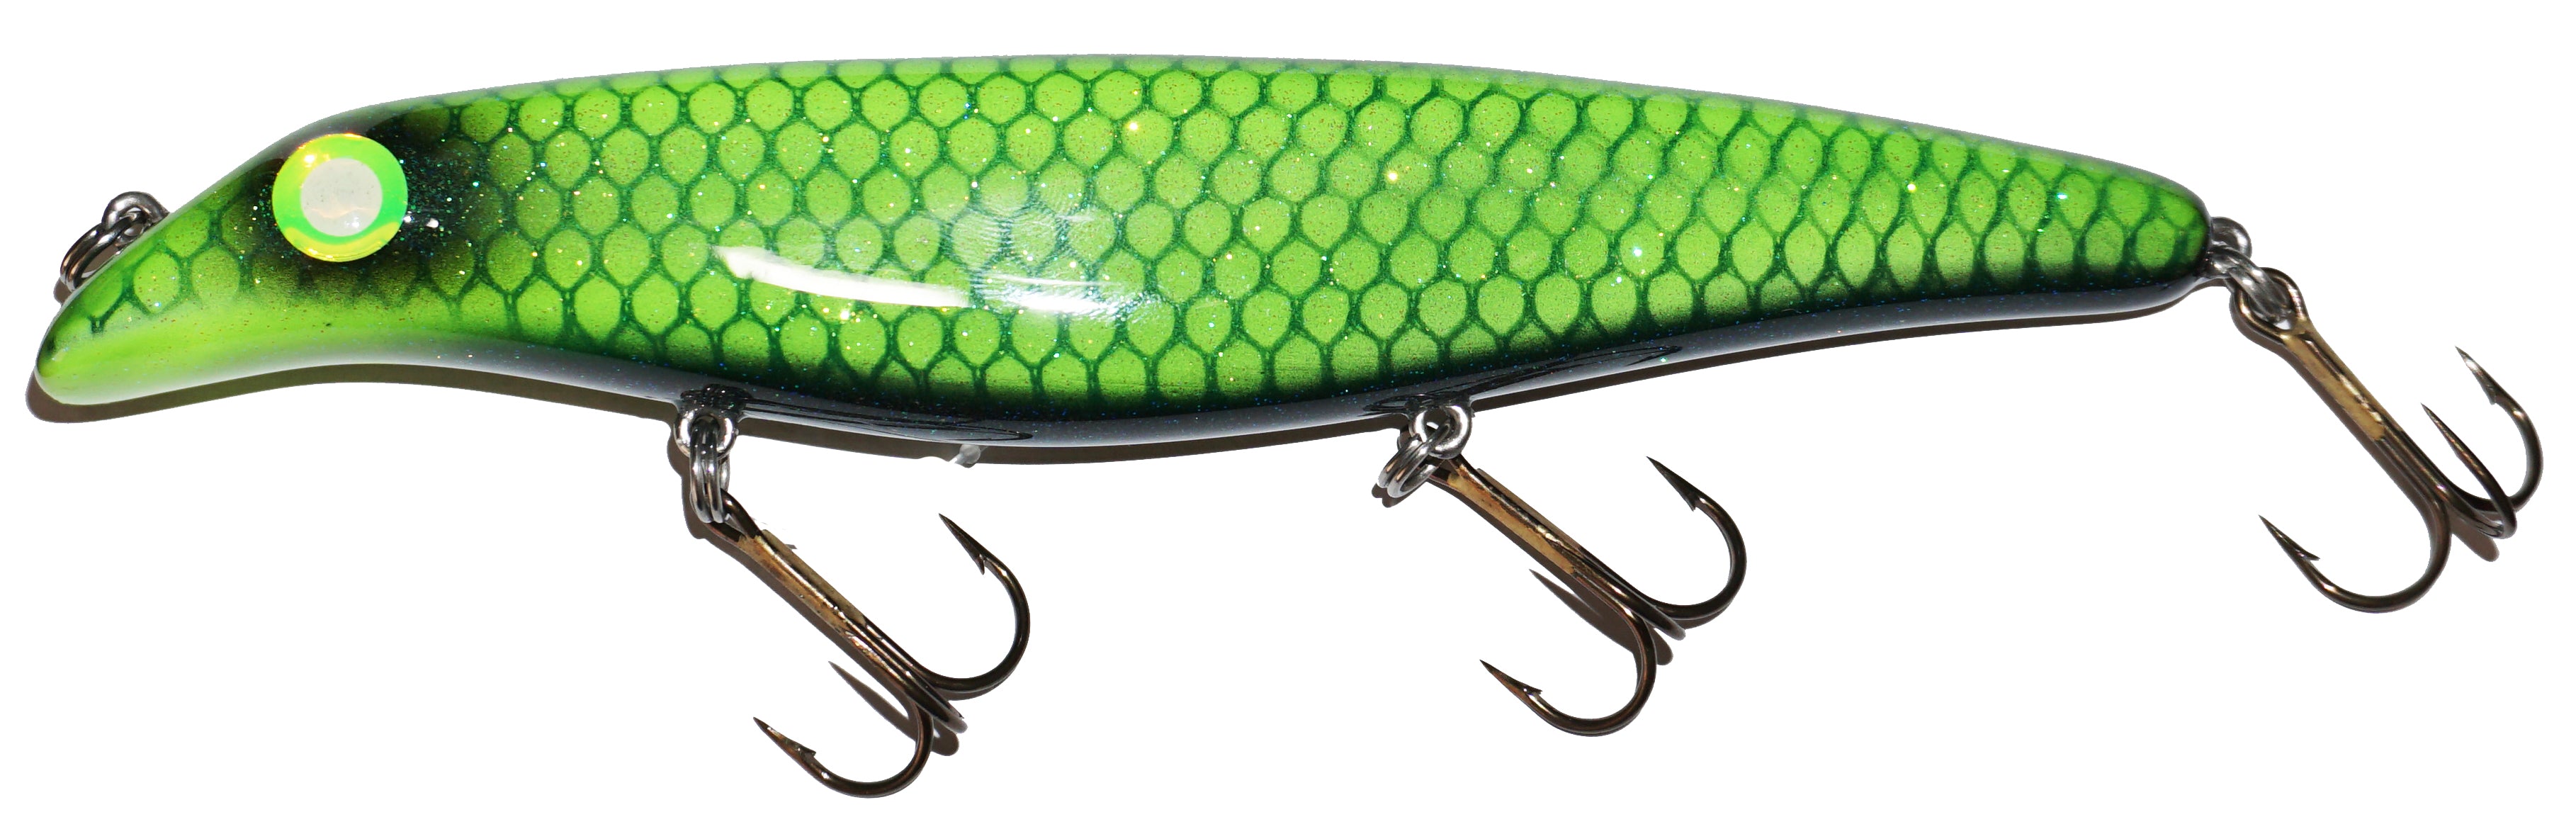 Musky Lures - Handcrafted cedar wood lures for northern pike, musky,  walleye and bass. Big Fork Lures Official Site